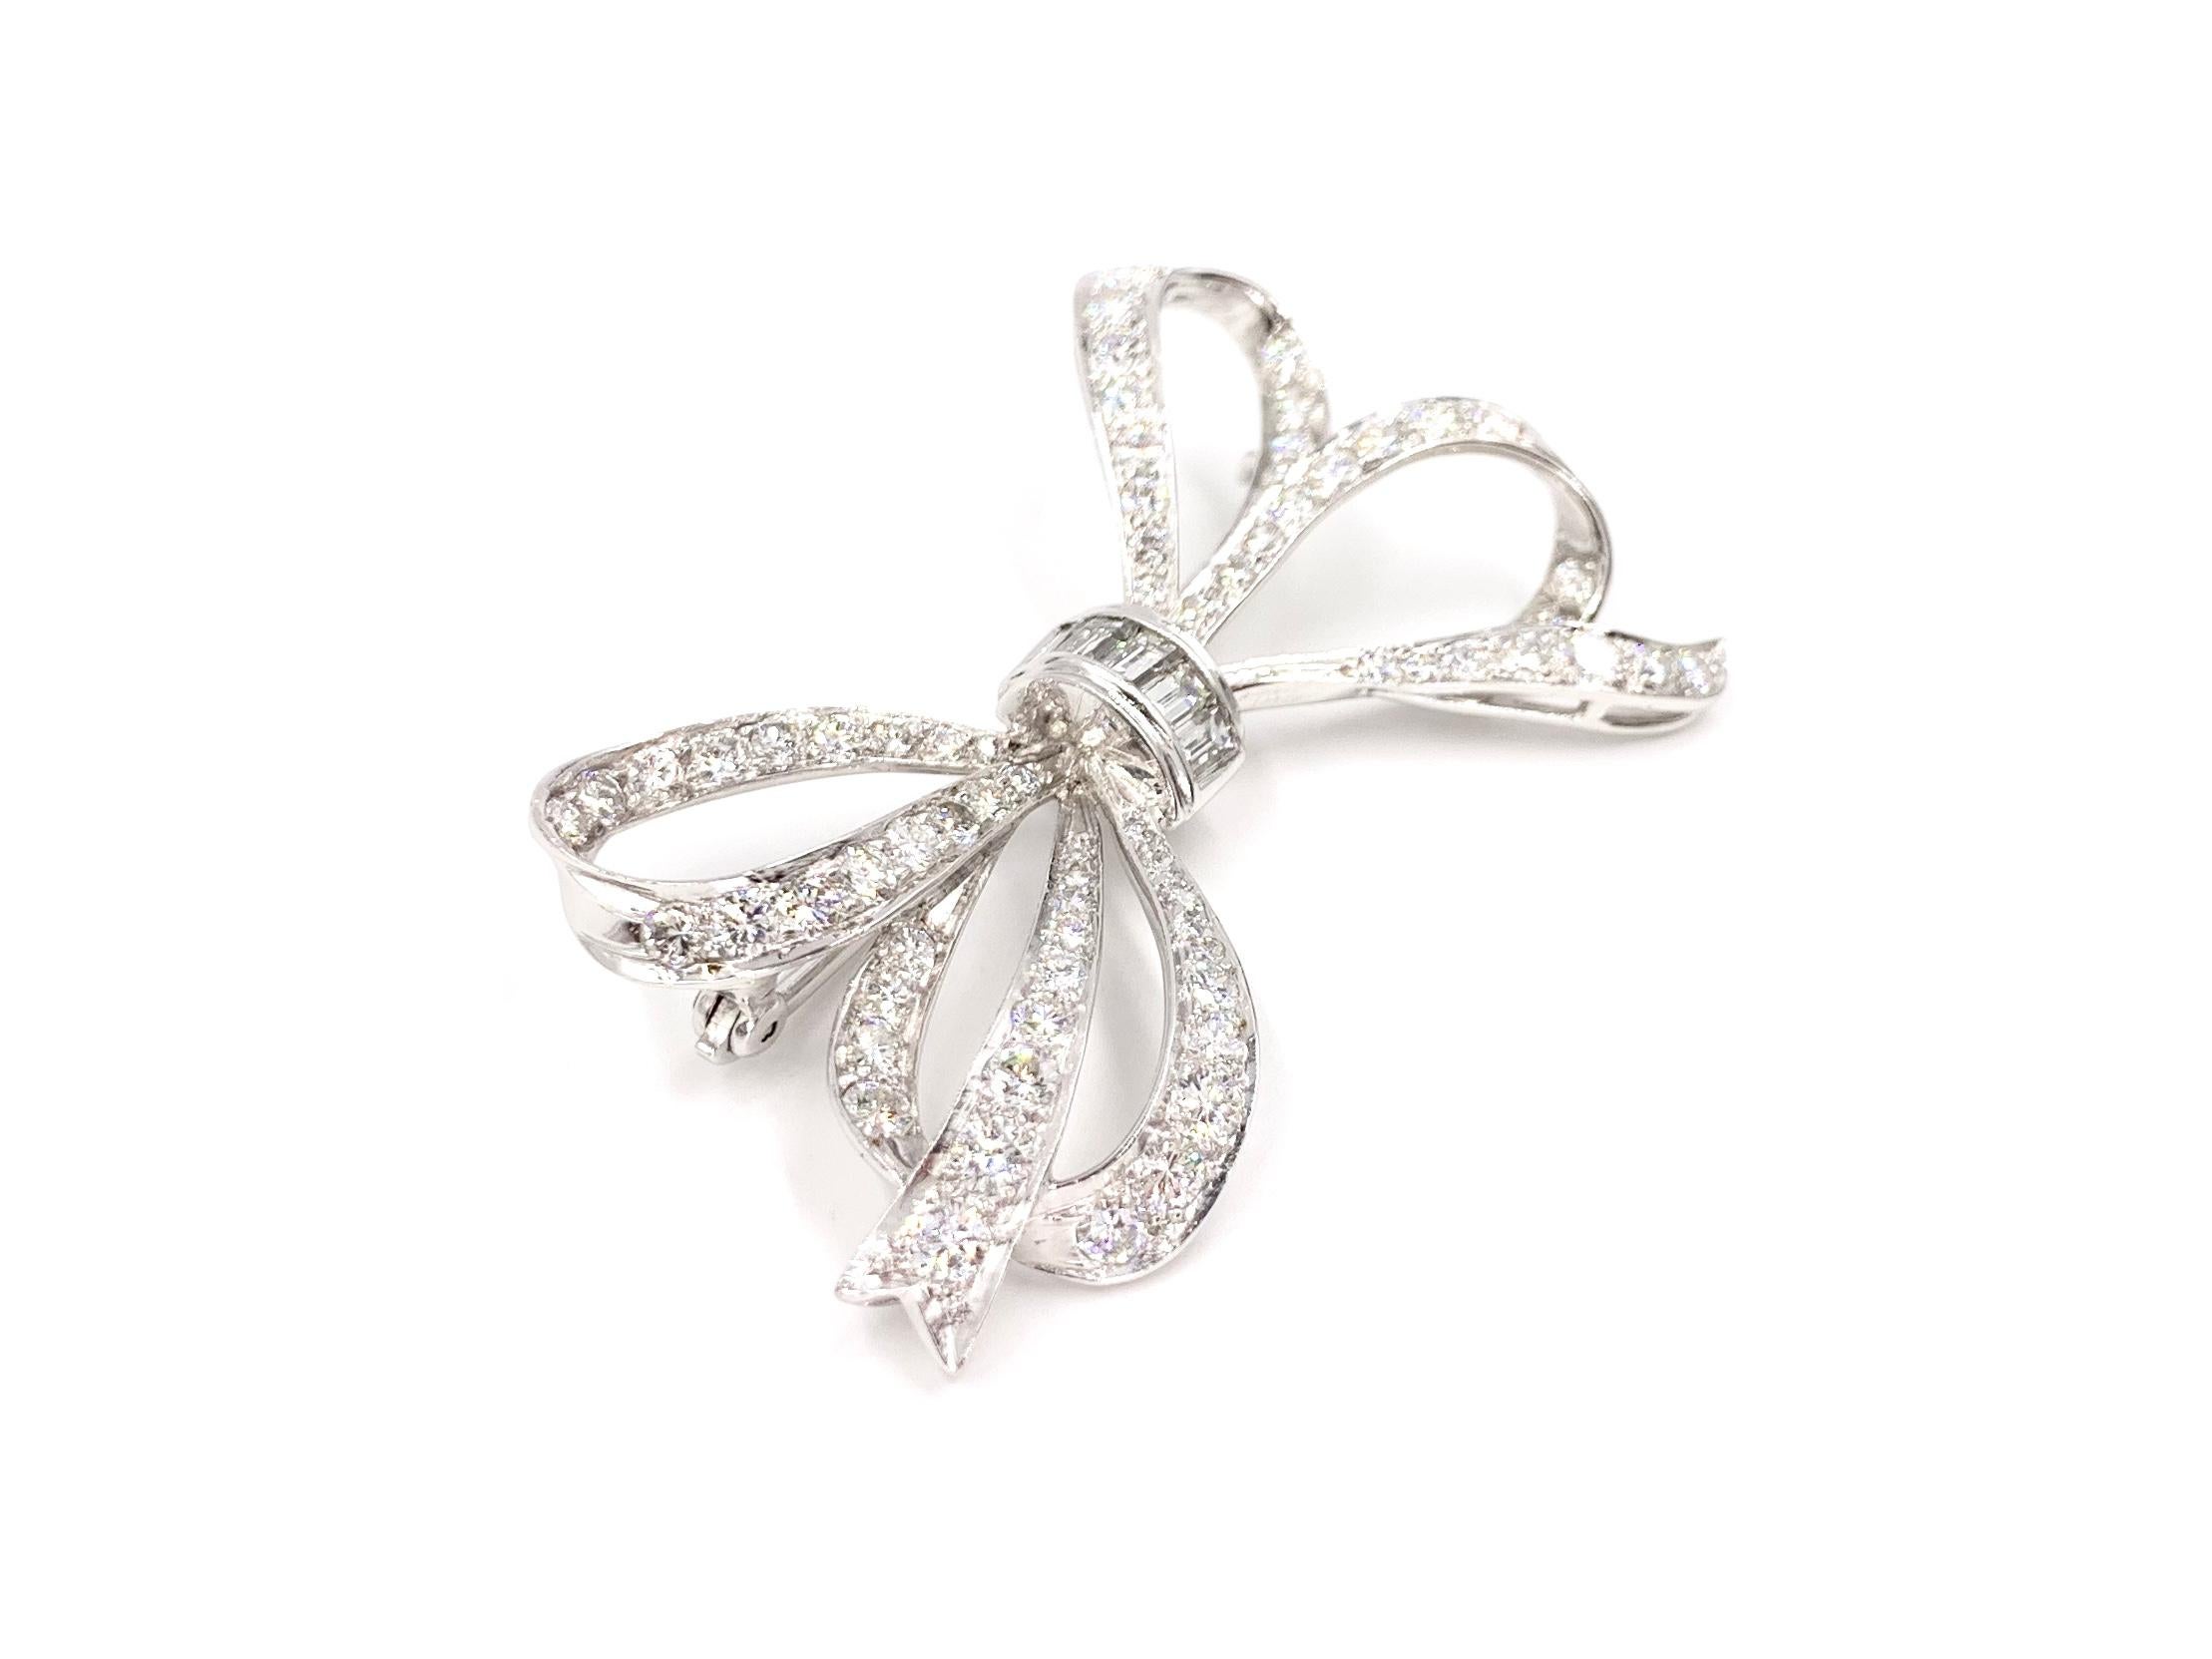 An elegant 14 karat white gold flowing bow brooch with round brilliant and substantially sized baguette diamonds at approximately 2.50 carats total weight. Diamond quality is approximately G-H color, SI1 clarity.
Brooch measures 55mm width across